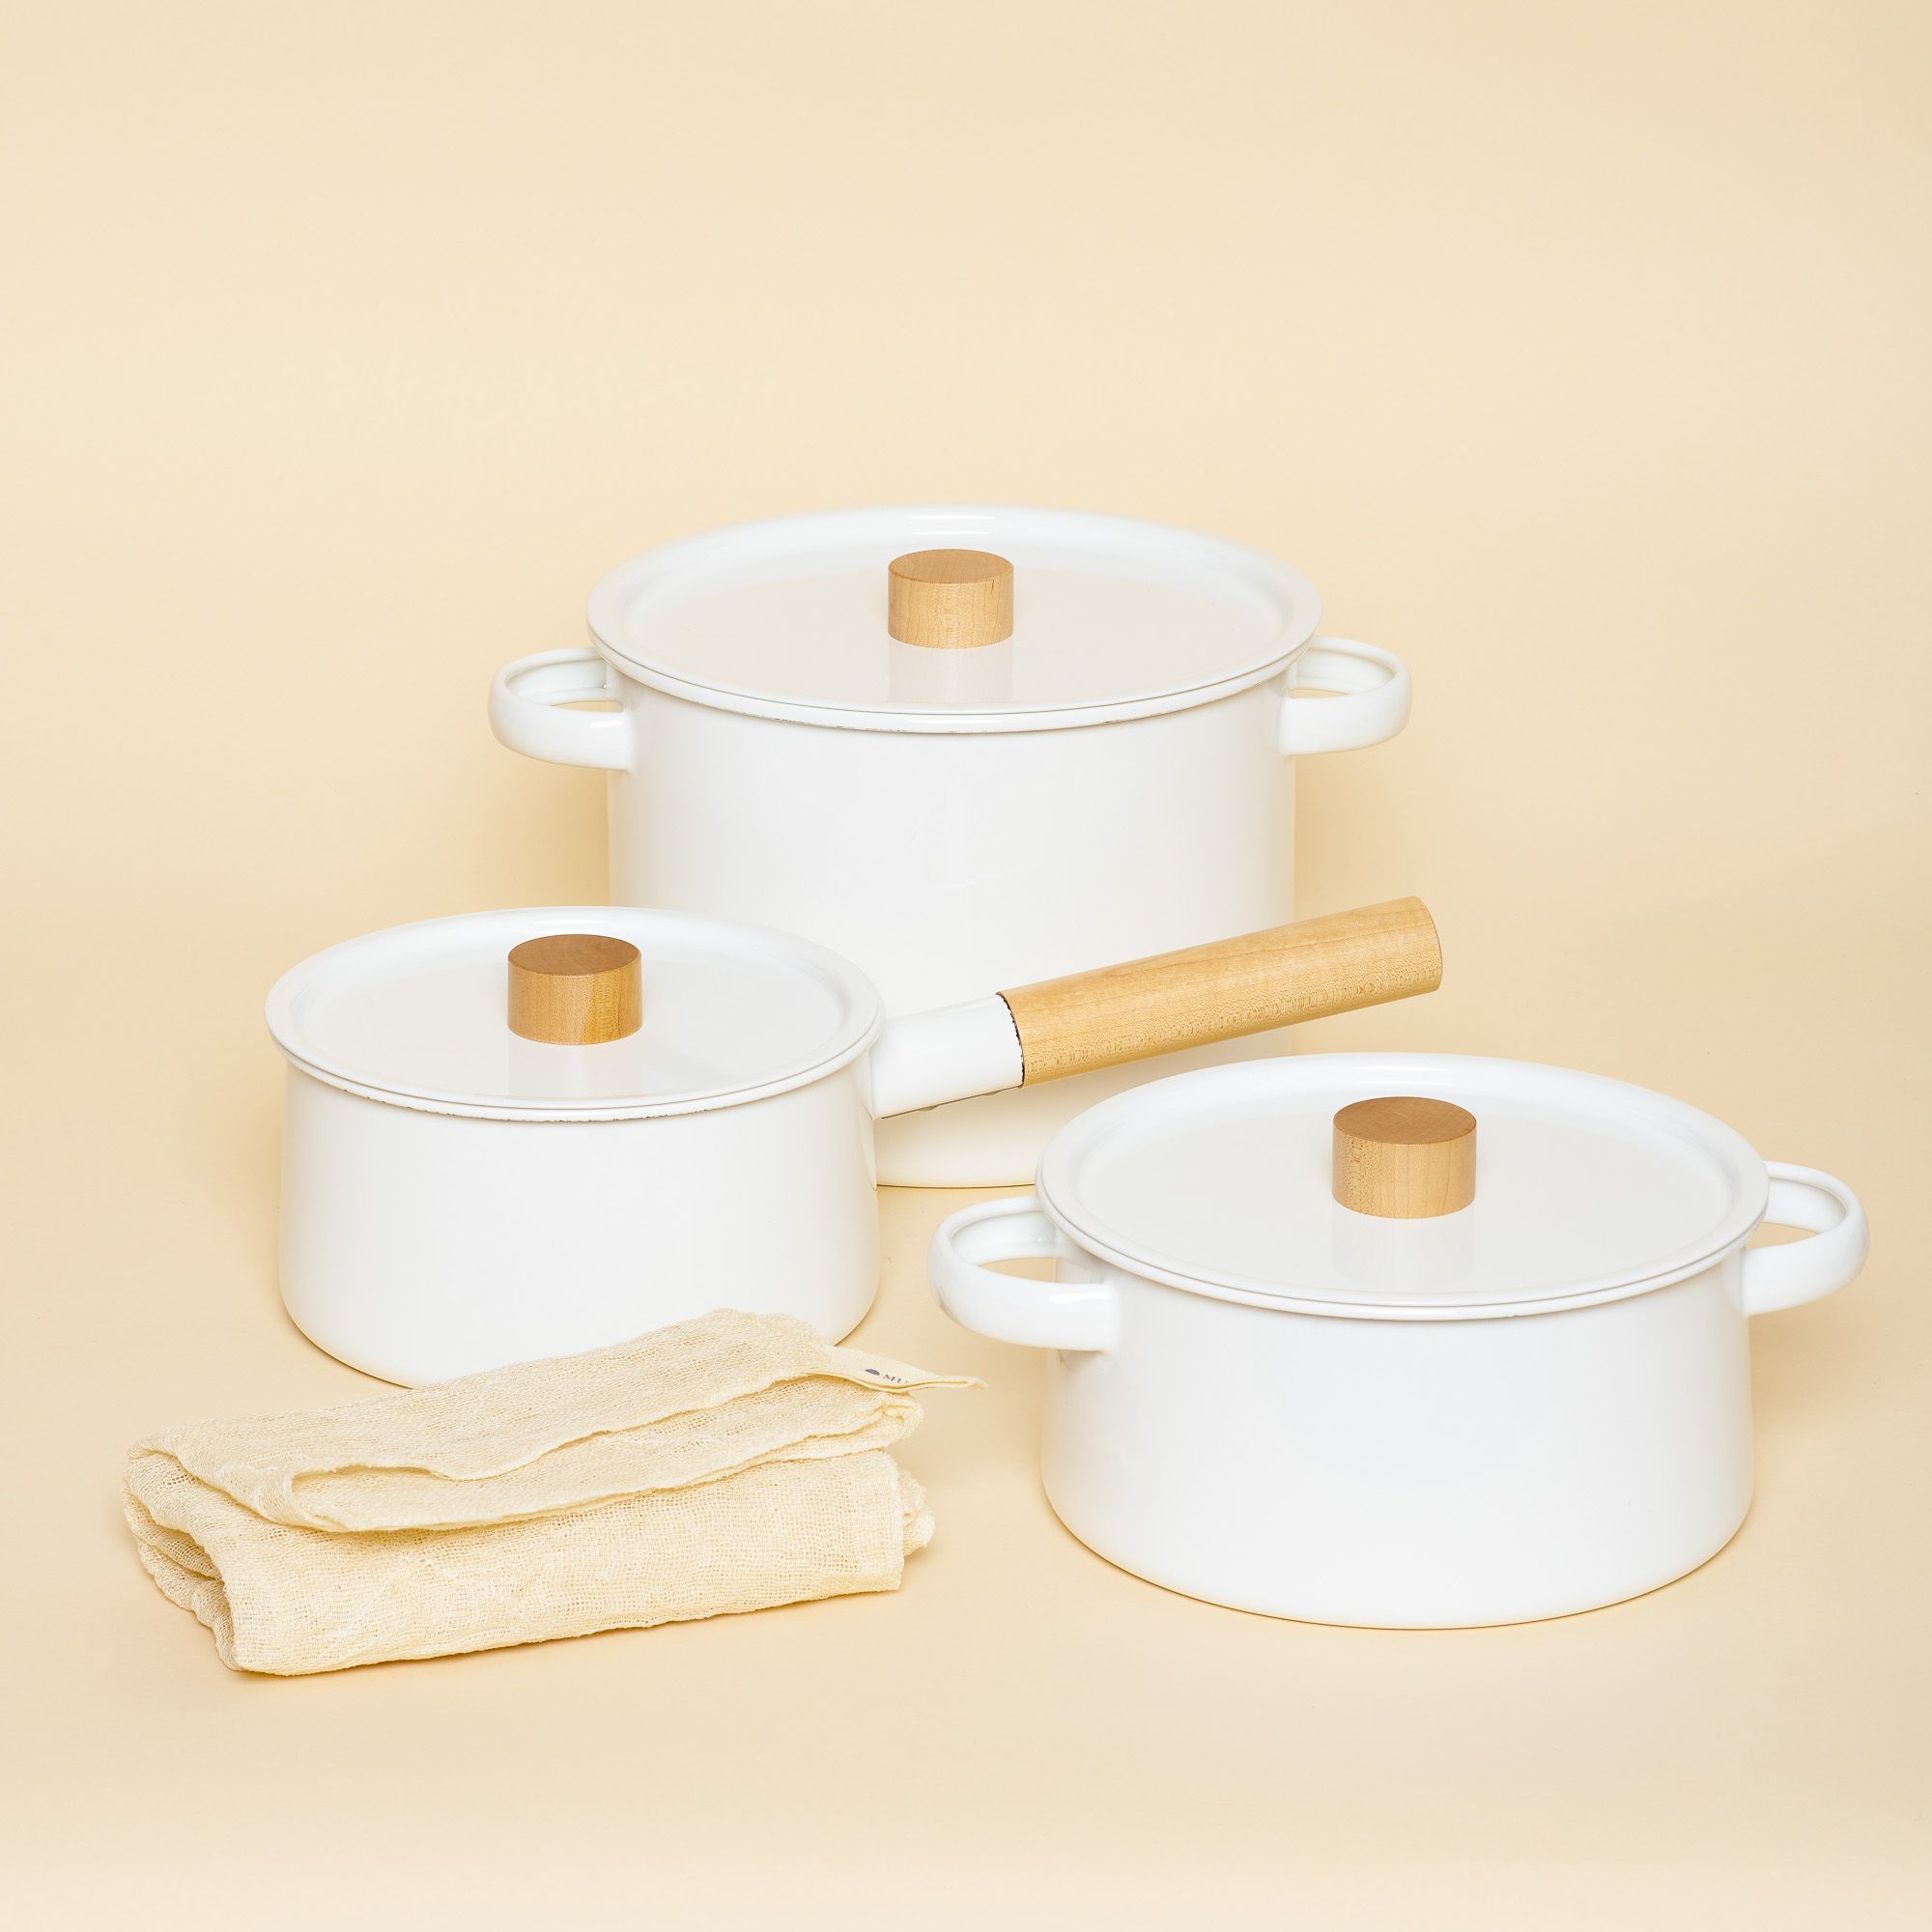 A set of three white enamel cookware pots and pans